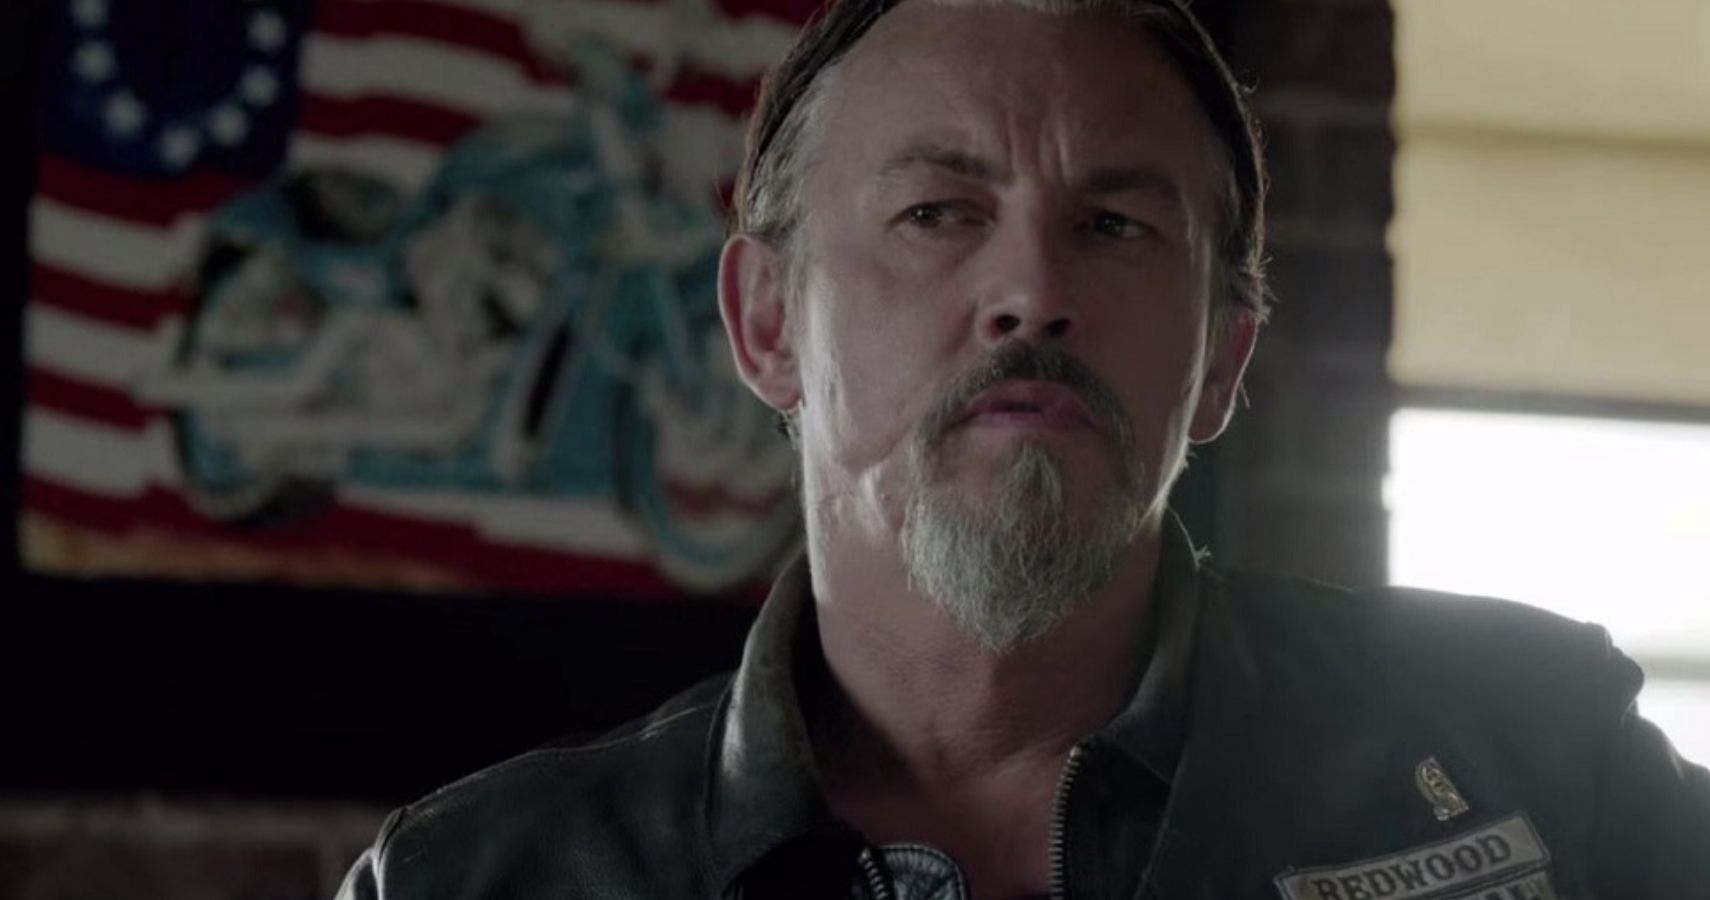 SAMCRO Vice President Chibs Telford looks on inside the clubhouse